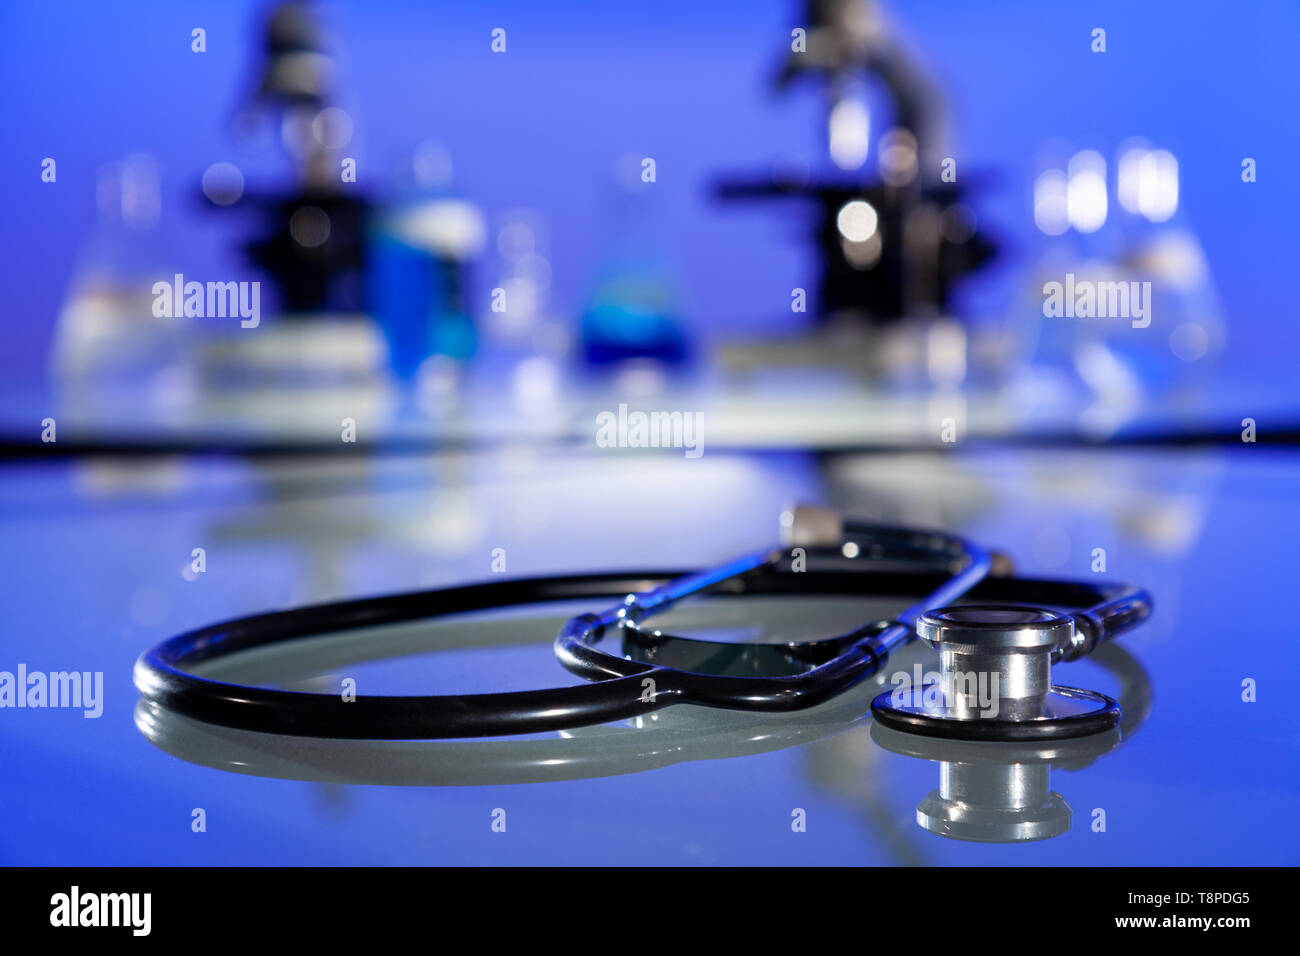 Stethoscope, microscopes and medical equipment in a hospital laboratory environment Stock Photo